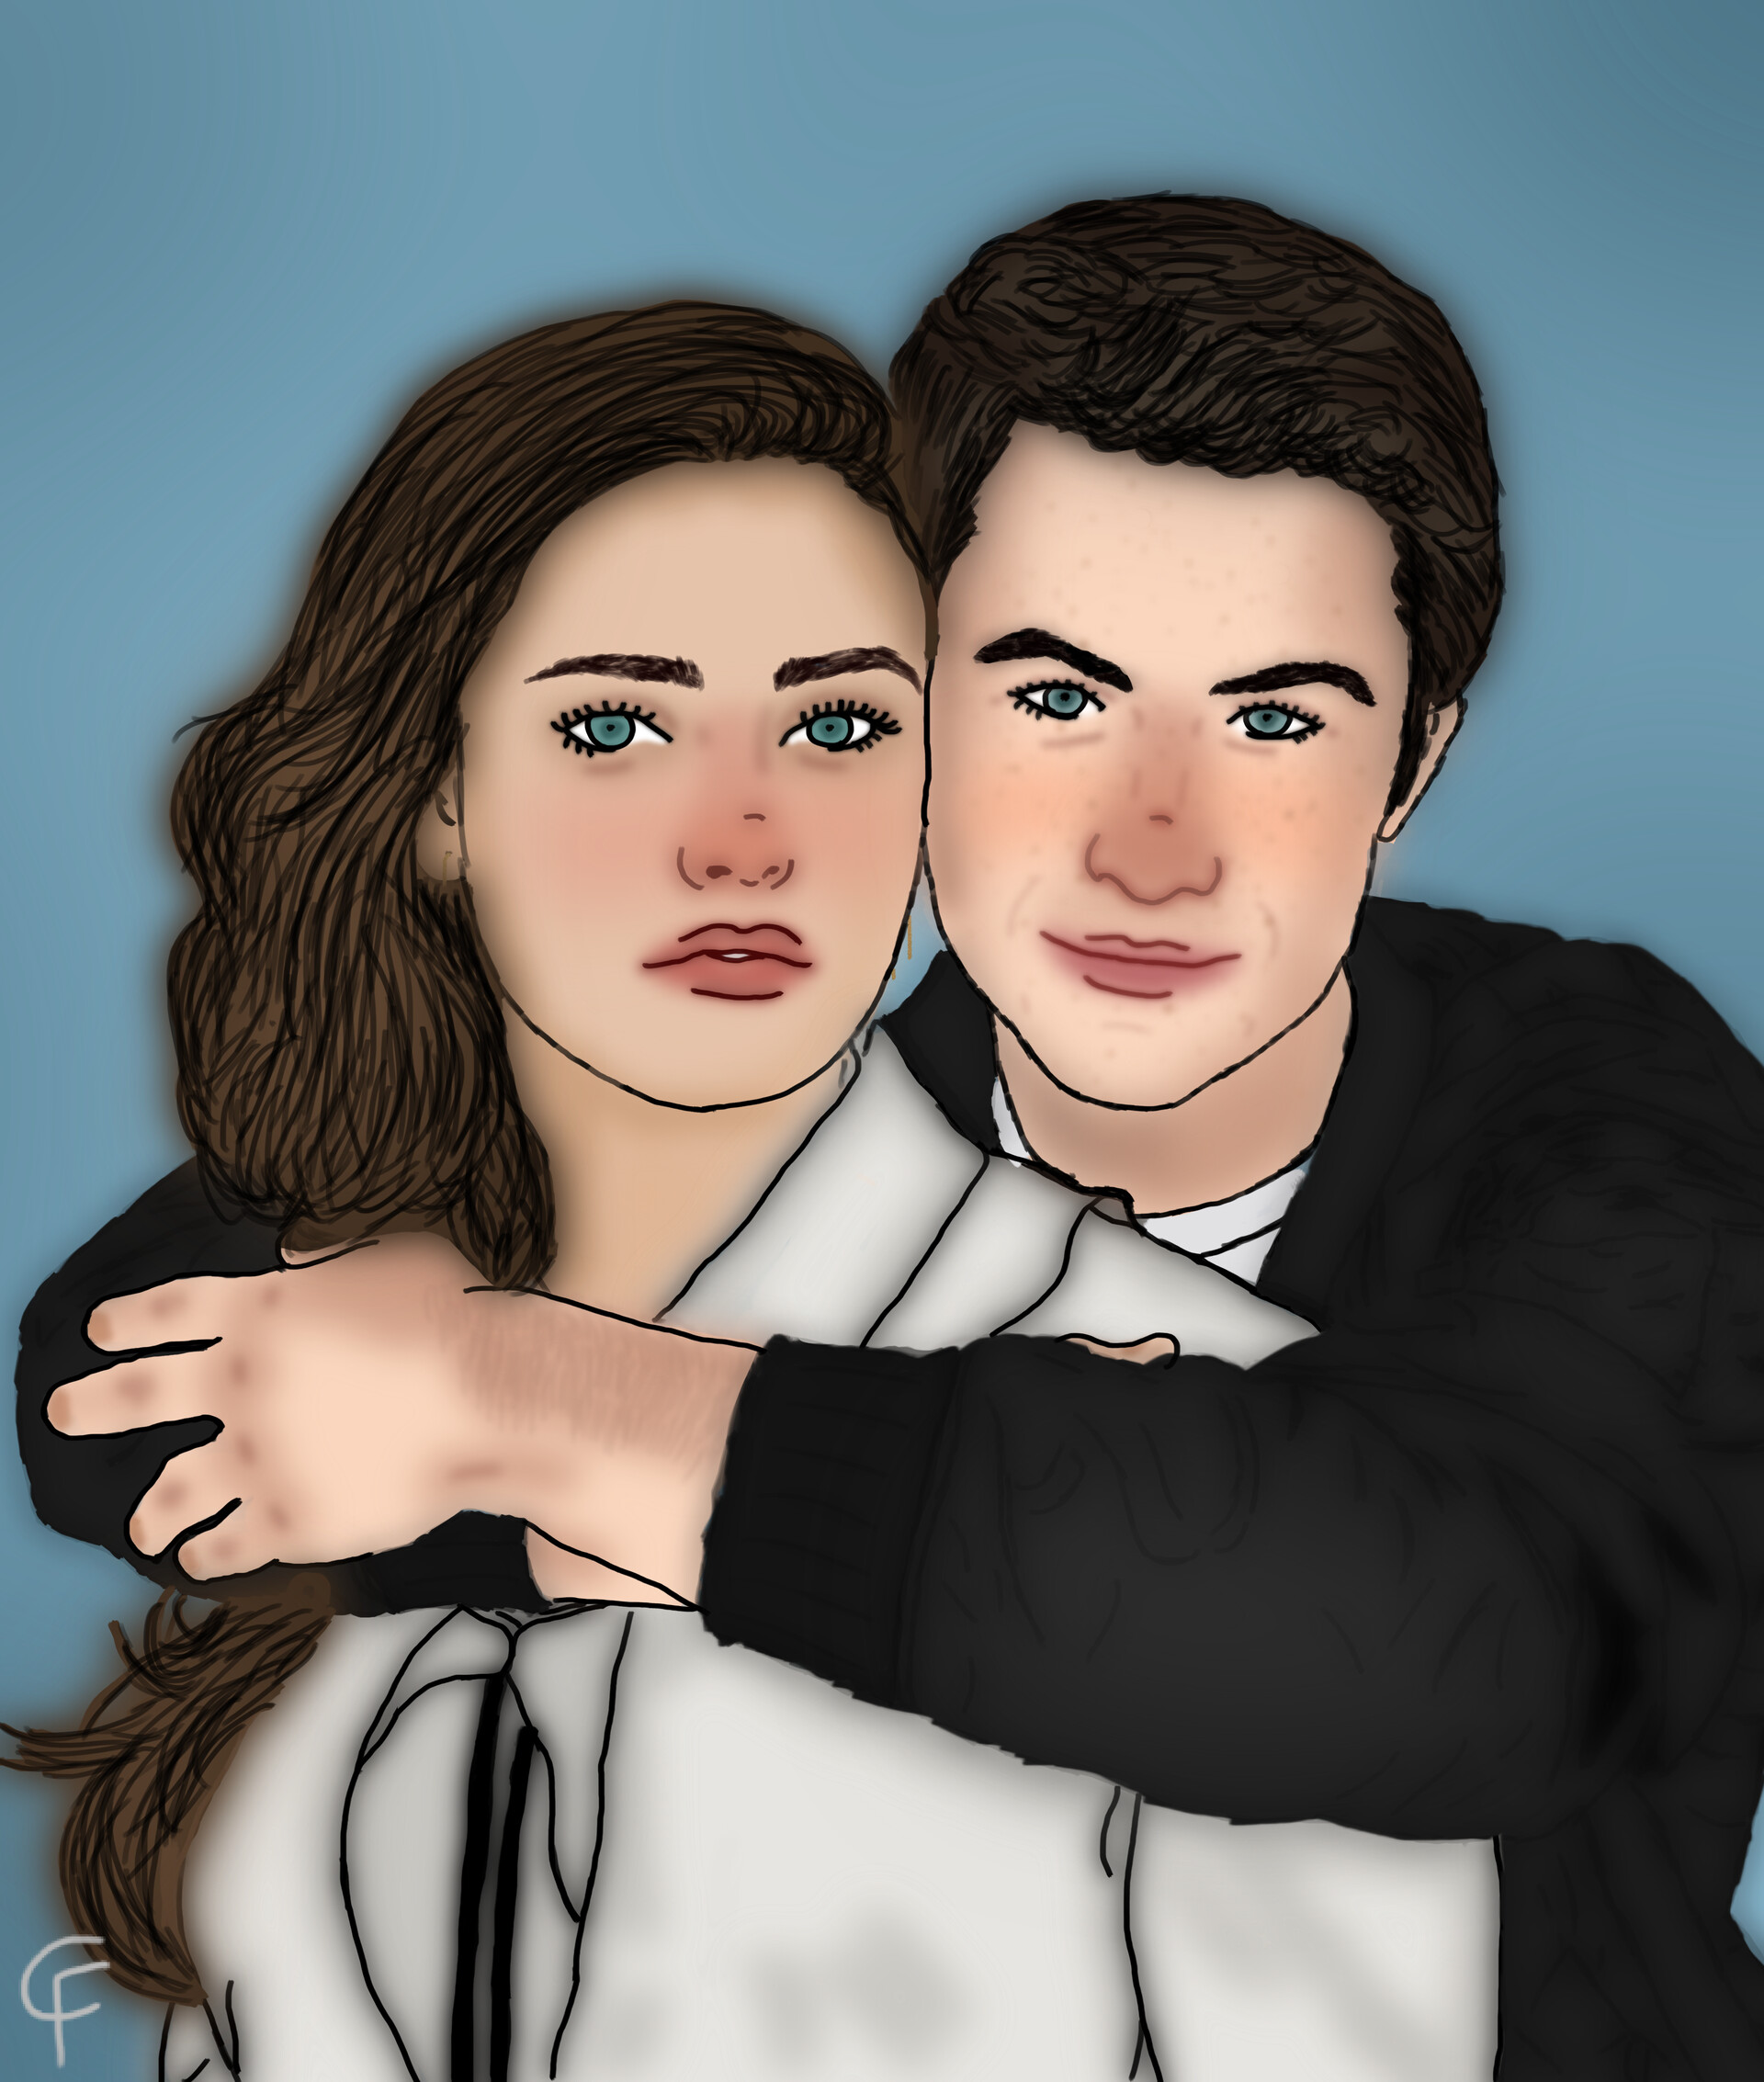 Clay and Hannah from 13 Reasons Why. 